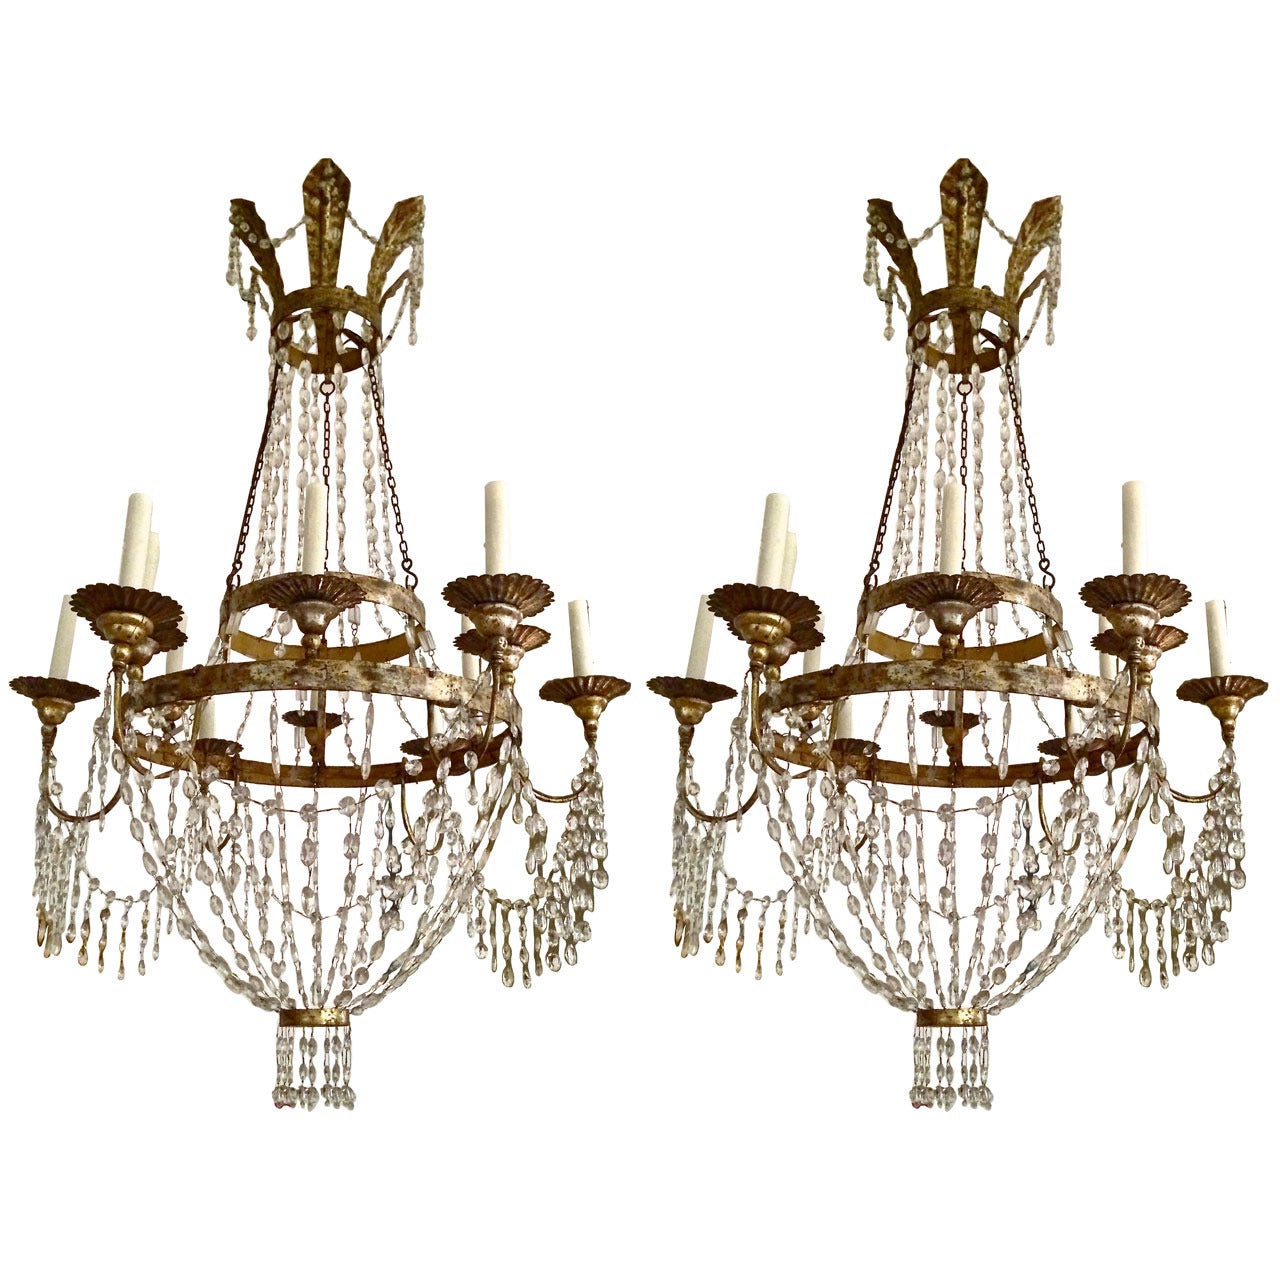 Italian empire cut glass mounted silvered metal twelve-light chandelier.

Main annulus supporting two rows of tiered light arms joined by faceted swags and joined to upper rings by swags, surmounted by six scrolled leaf corona.

Neoclassical